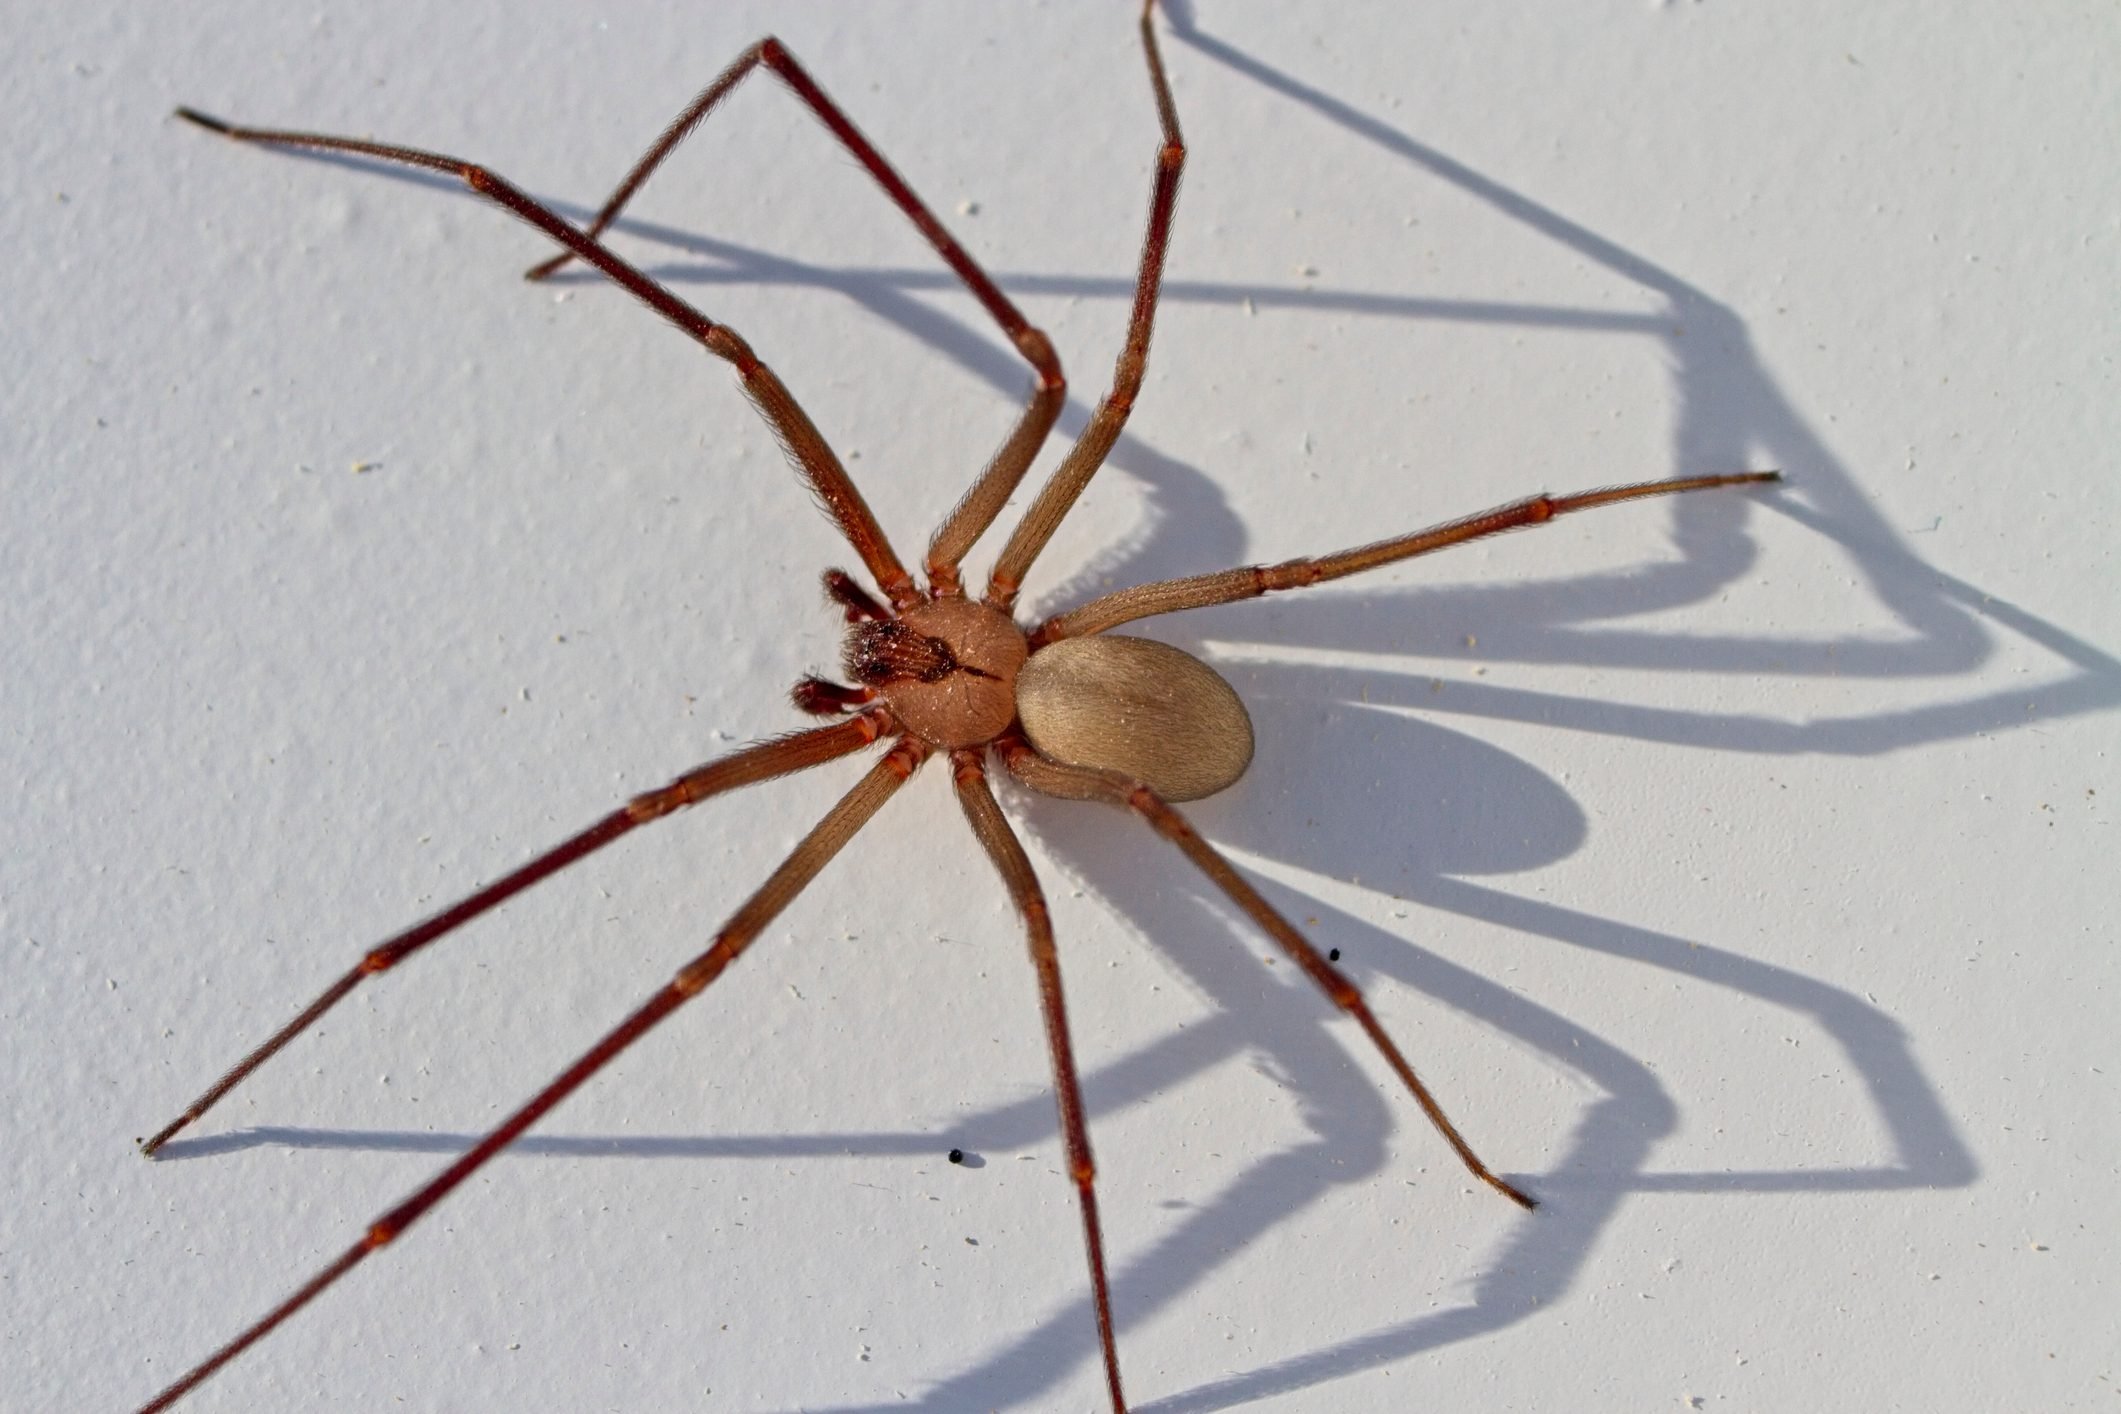 Southern House Spider: Identification Tips